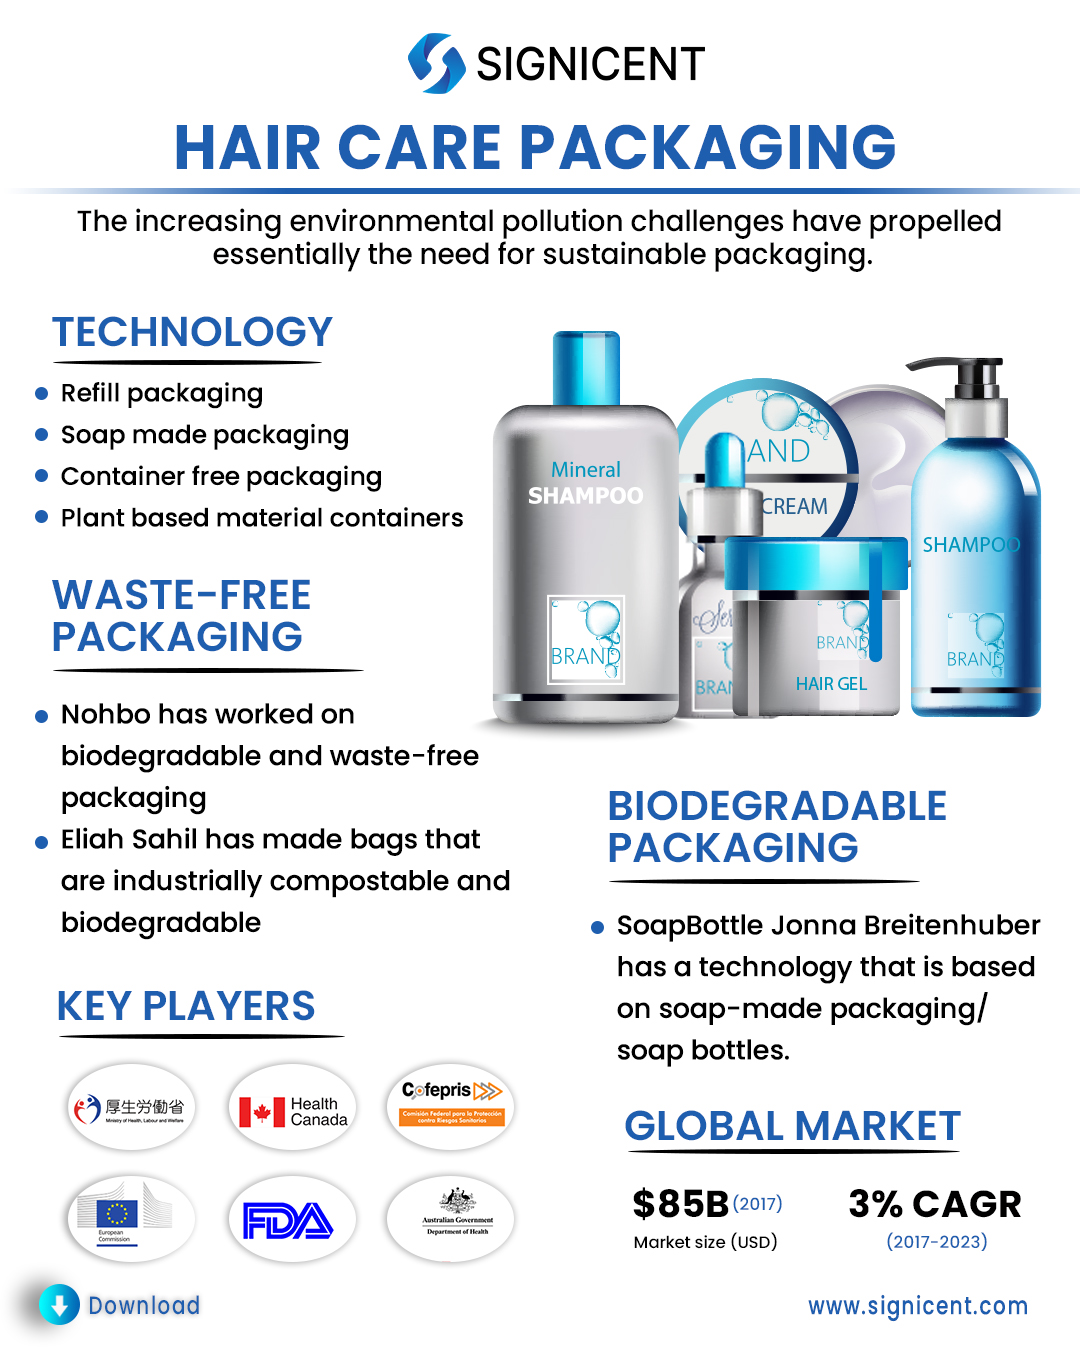 Hair Care Packaging Report: Sustainable Innovations & Products to